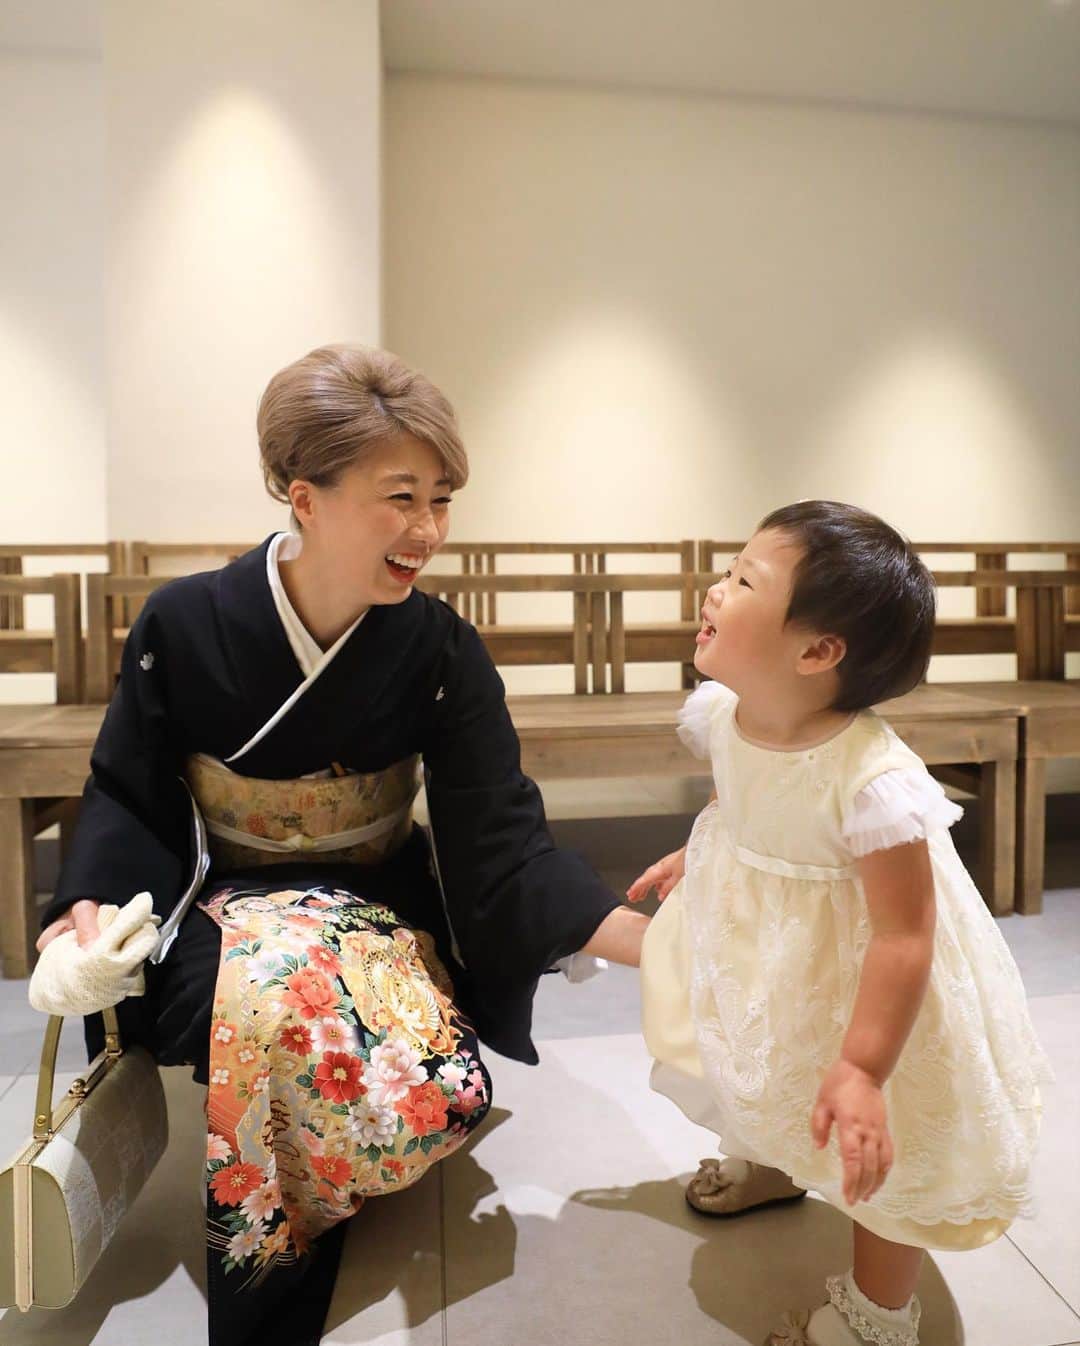 吉田ちかさんのインスタグラム写真 - (吉田ちかInstagram)「Wore my first “tomesode” (a formal kimono worn by married women) to Osaru-san’s little brother’s wedding today!﻿ ﻿ Pudding was asked to be the ring bearer and we were a bit worried that she’d be overwhelmed by the crowd and although she was a bit, she did a great (and quick lol) job. She ran over to her uncle with all her might and handed him the box with the rings💍 ﻿ ﻿ So happy for the newlywed couple! The groom, Osaru-san’s brother came with us to Singapore and he was so good with Pudding and very very helpful! He’s going to make an amazing husband😊 The beautiful bride has actually been watching my videos for awhile so she knows a lot more about me than I do about her, but I’m looking forward to getting to know her better and changing that! ﻿ ﻿ 今日はおさるさんの弟の結婚式で初めて留袖を着ました！﻿ ﻿ プリンがリングガールをお願いされて、会場に圧倒されてしまうのではないかな〜と思っていたのですが、最近のmeet-upでイベント慣れしたのか、しっかり任務を務めてくれました！必死に大好きな叔父に走っていき、無事リングボックスを渡せました💍💕﻿ ﻿ 新郎、おさるさんの弟は、先月撮影とプリンの手伝いでシンガポールに一緒に来てくれました。プリンと遊ぶのも、とても上手で気が効いてこれは良い旦那さんになる！と思いました😉新婦はなんとちか友で！前から動画を見てくれていました。私のことは色々と知ってくれているので、これから彼女のことも色々と知って仲良くなりたいです❤️ 2人とも、本当におめでとう！﻿ ﻿ #髪の毛 #大きい #銀座感🤣 #着付けが終わっておさるさんに会ったら #面白いね #極妻？ #と言われた😅 #シンガポール動画アップしました❣️」2月16日 23時07分 - bilingirl_chika